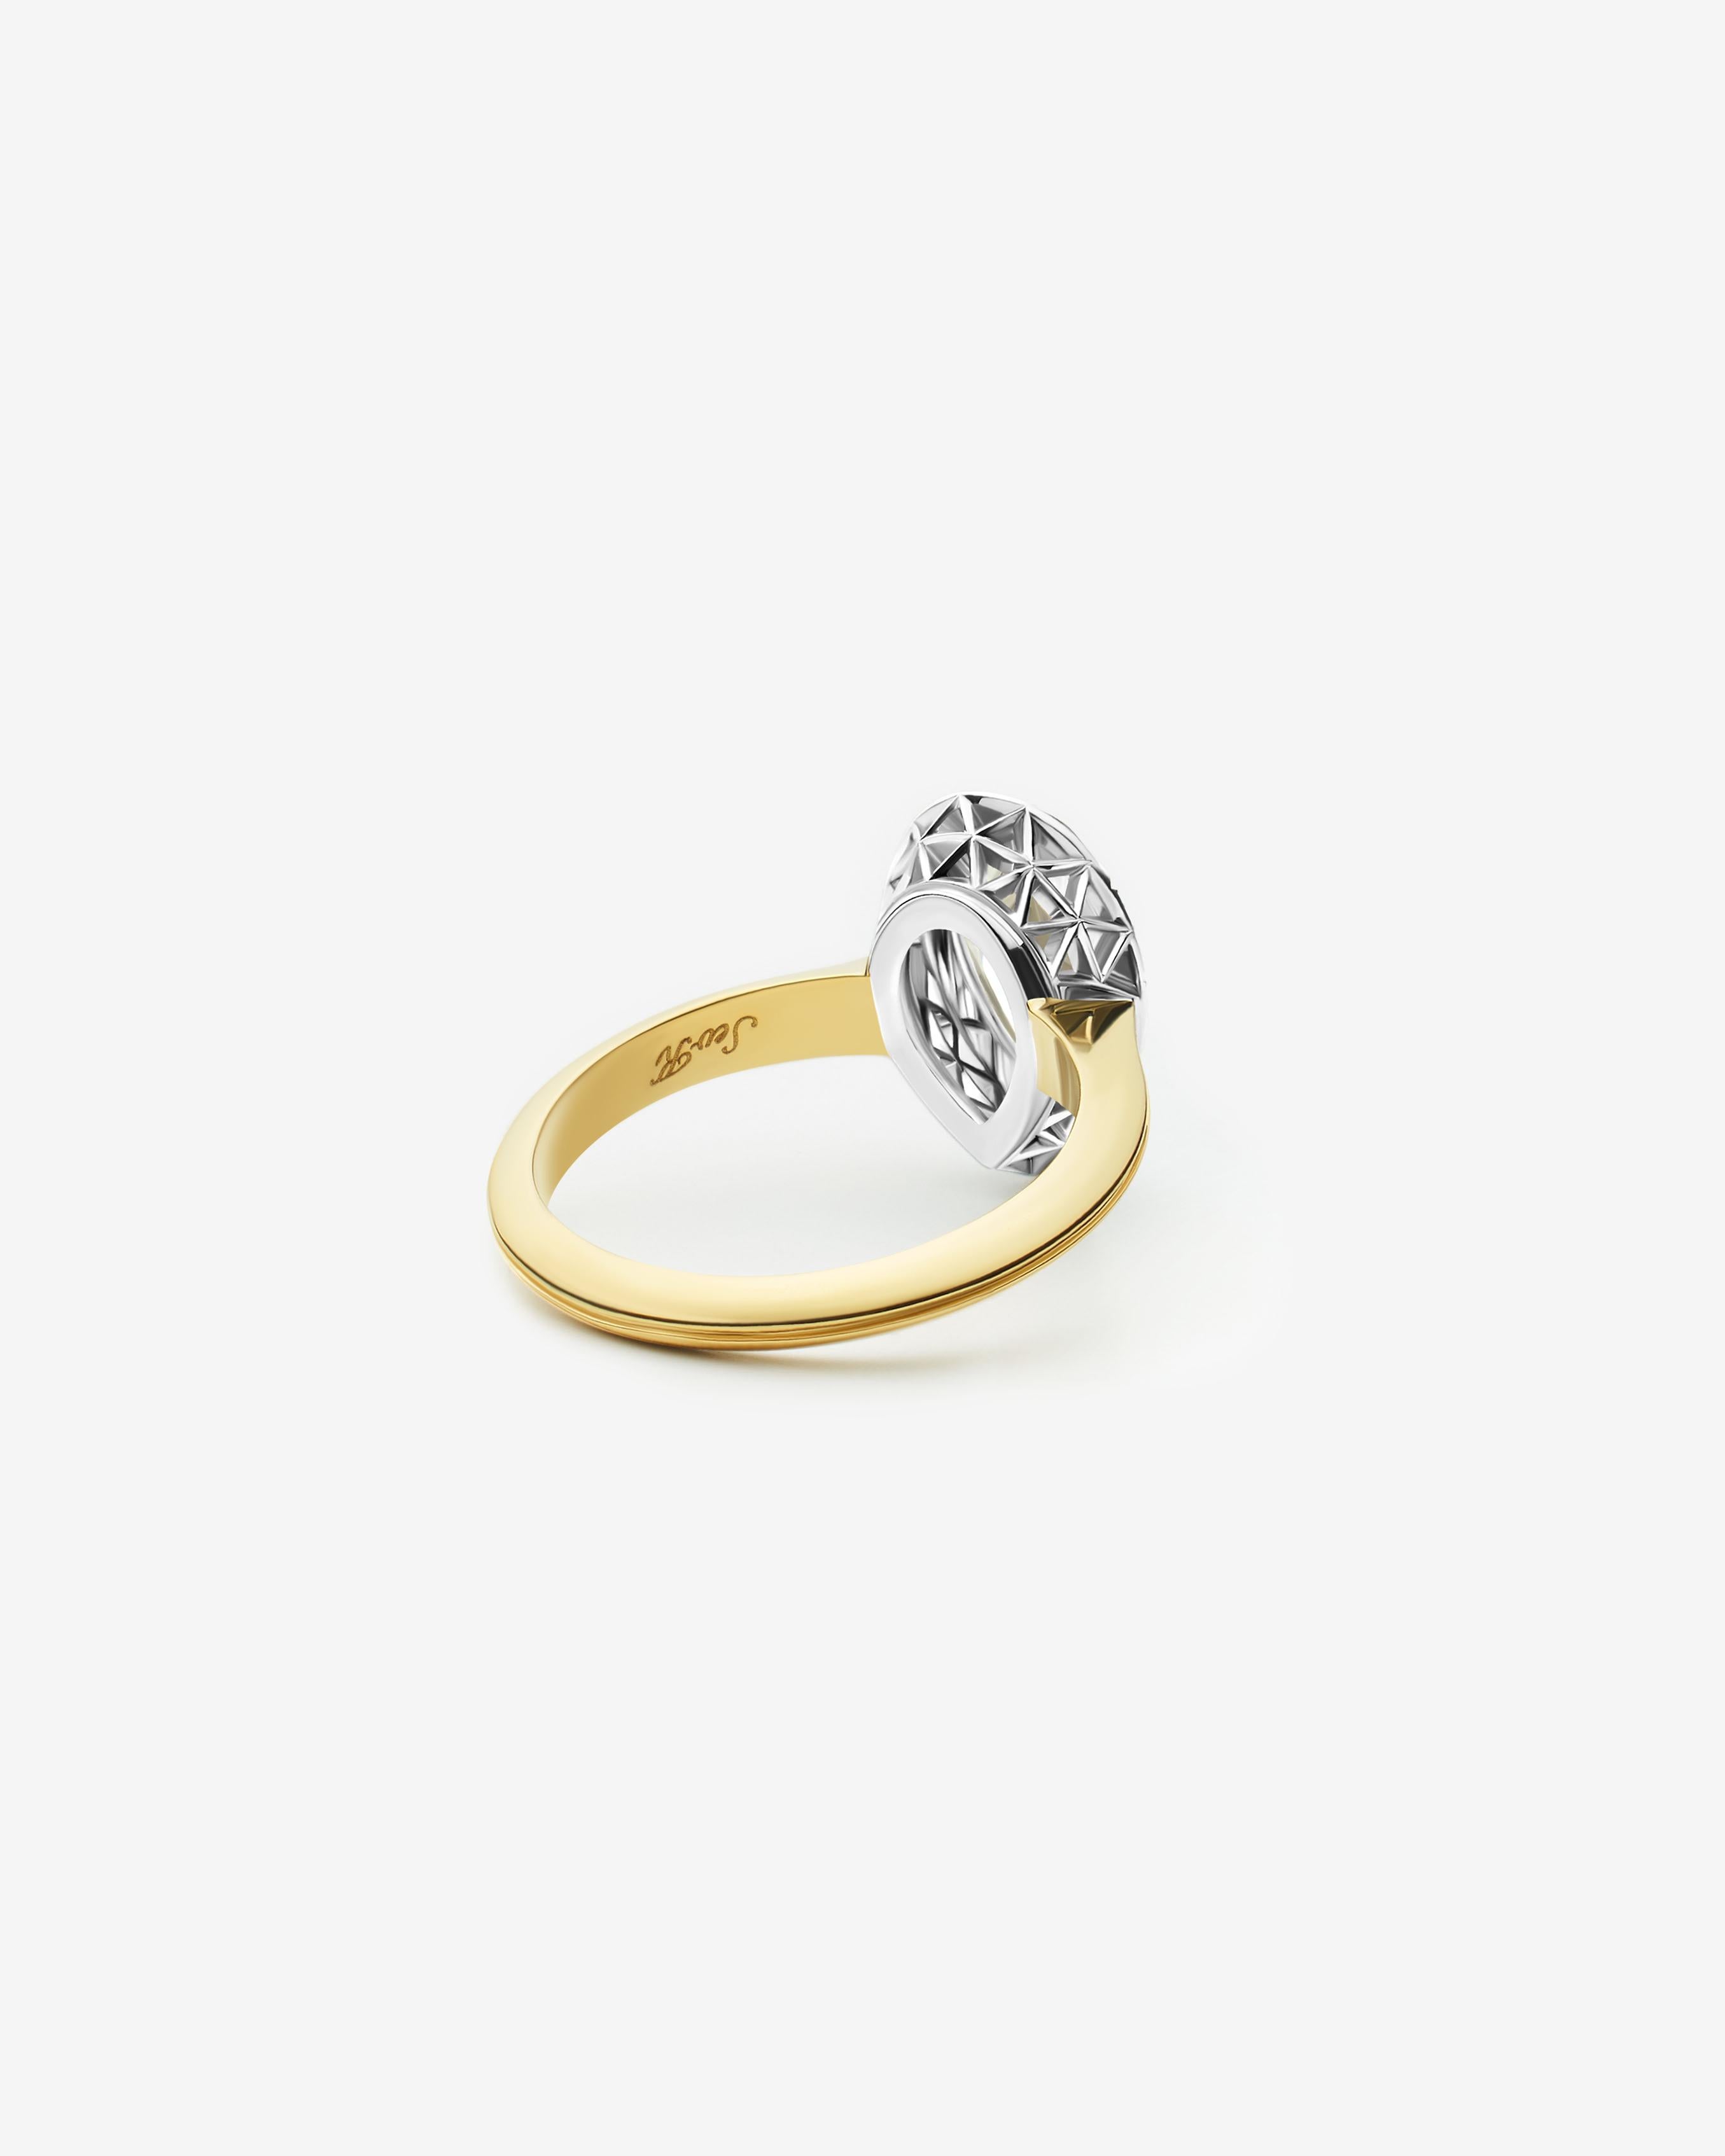 For Sale:  18k Yellow and White Gold Diamond Cocktail Ring w 1.57 Carat Pear Shape Diamond 3